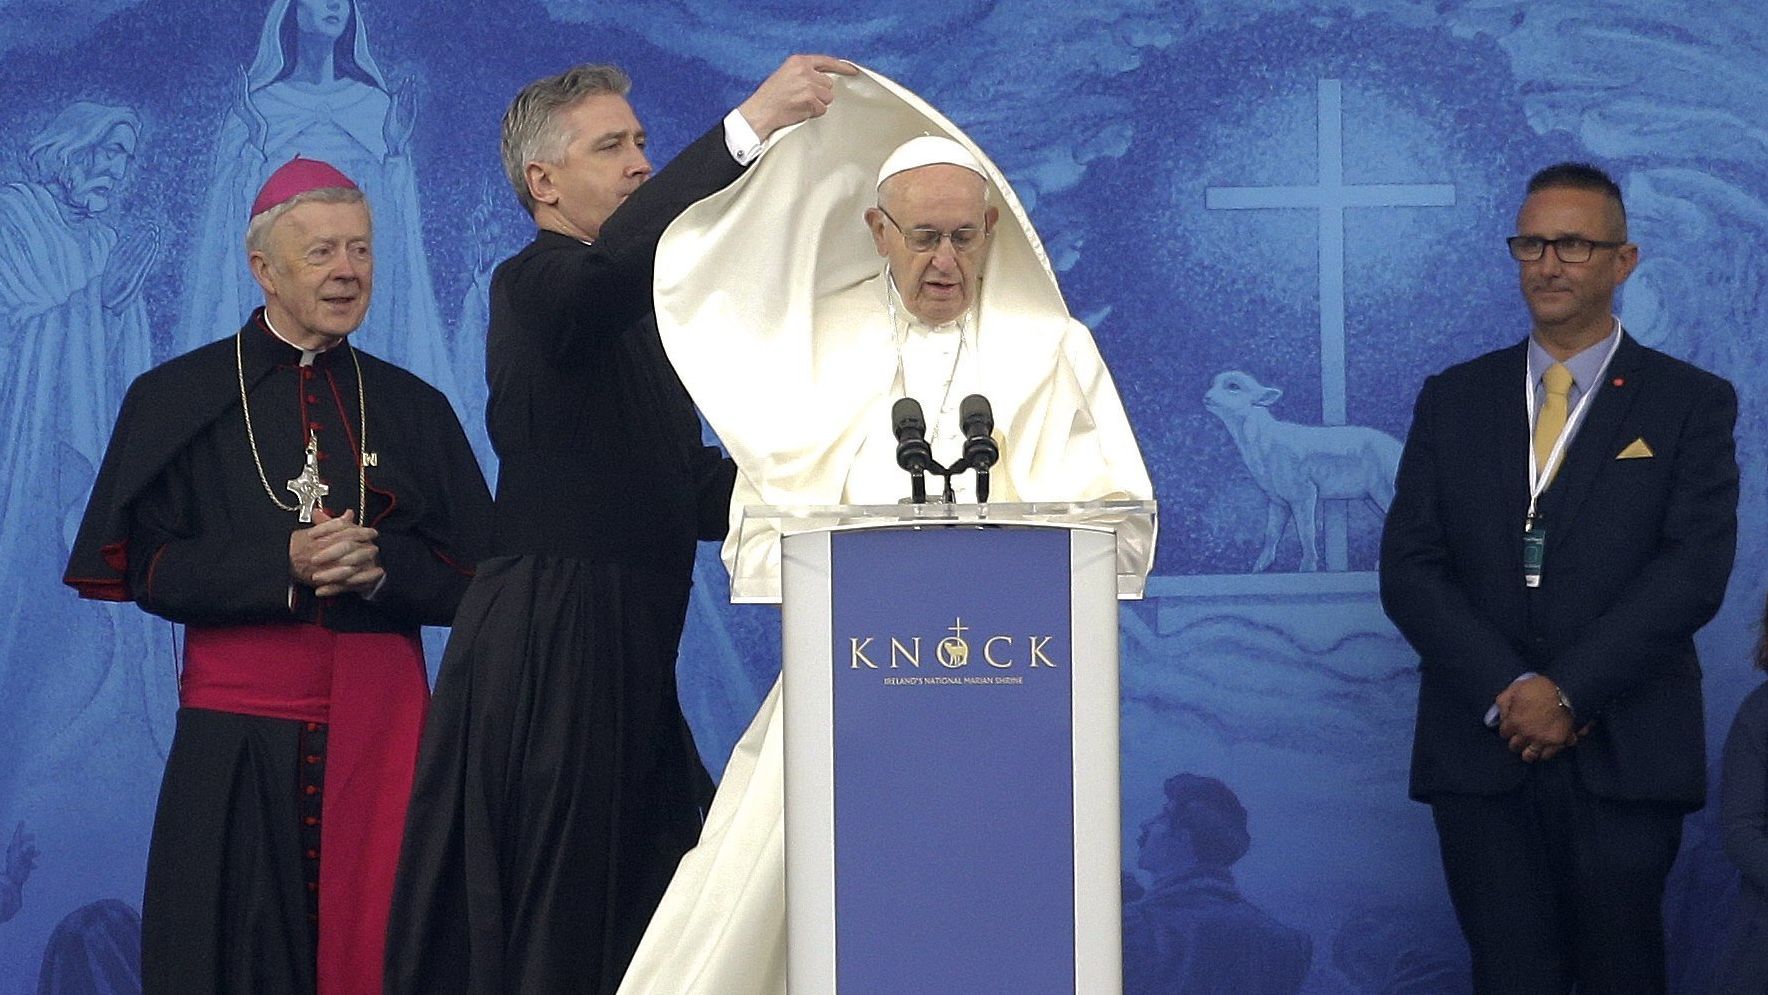 An aide adjusts Pope Francis' cape as he speaks at the Knock Shrine in Knock, Ireland, on Sunday.